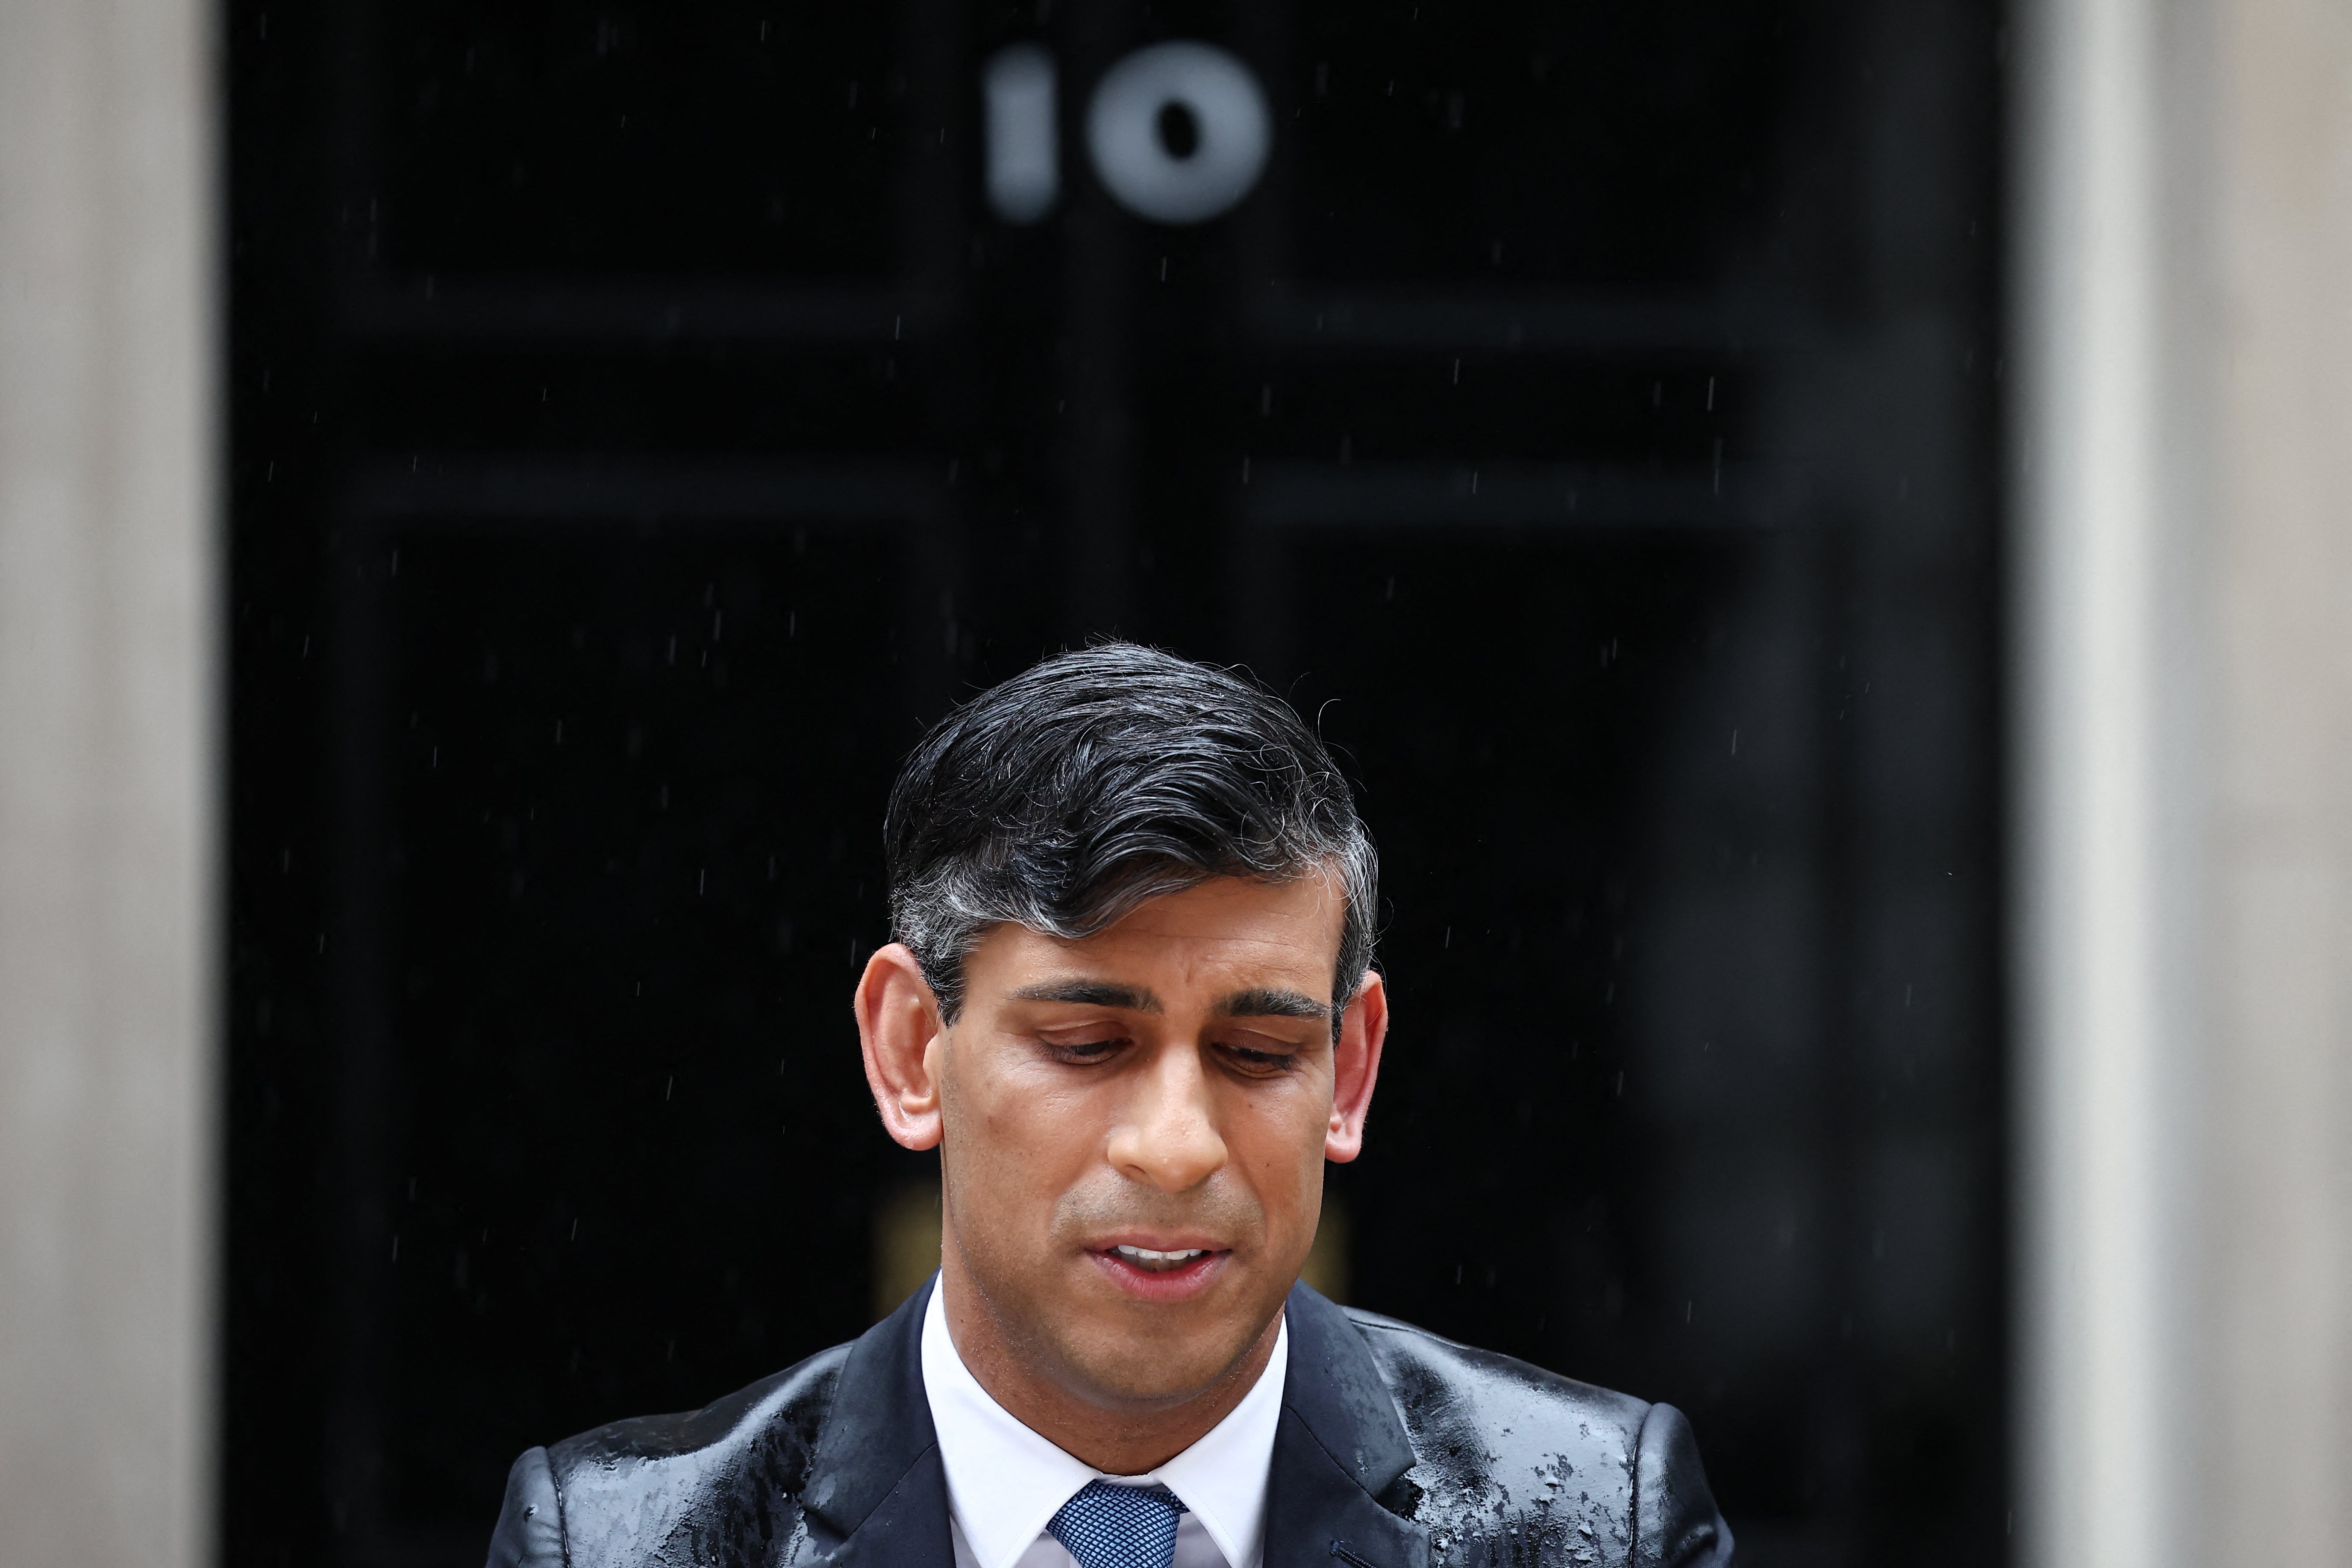 Heavy rain poured down on Rishi Sunak as he announced a July 4 General Election outside No 10